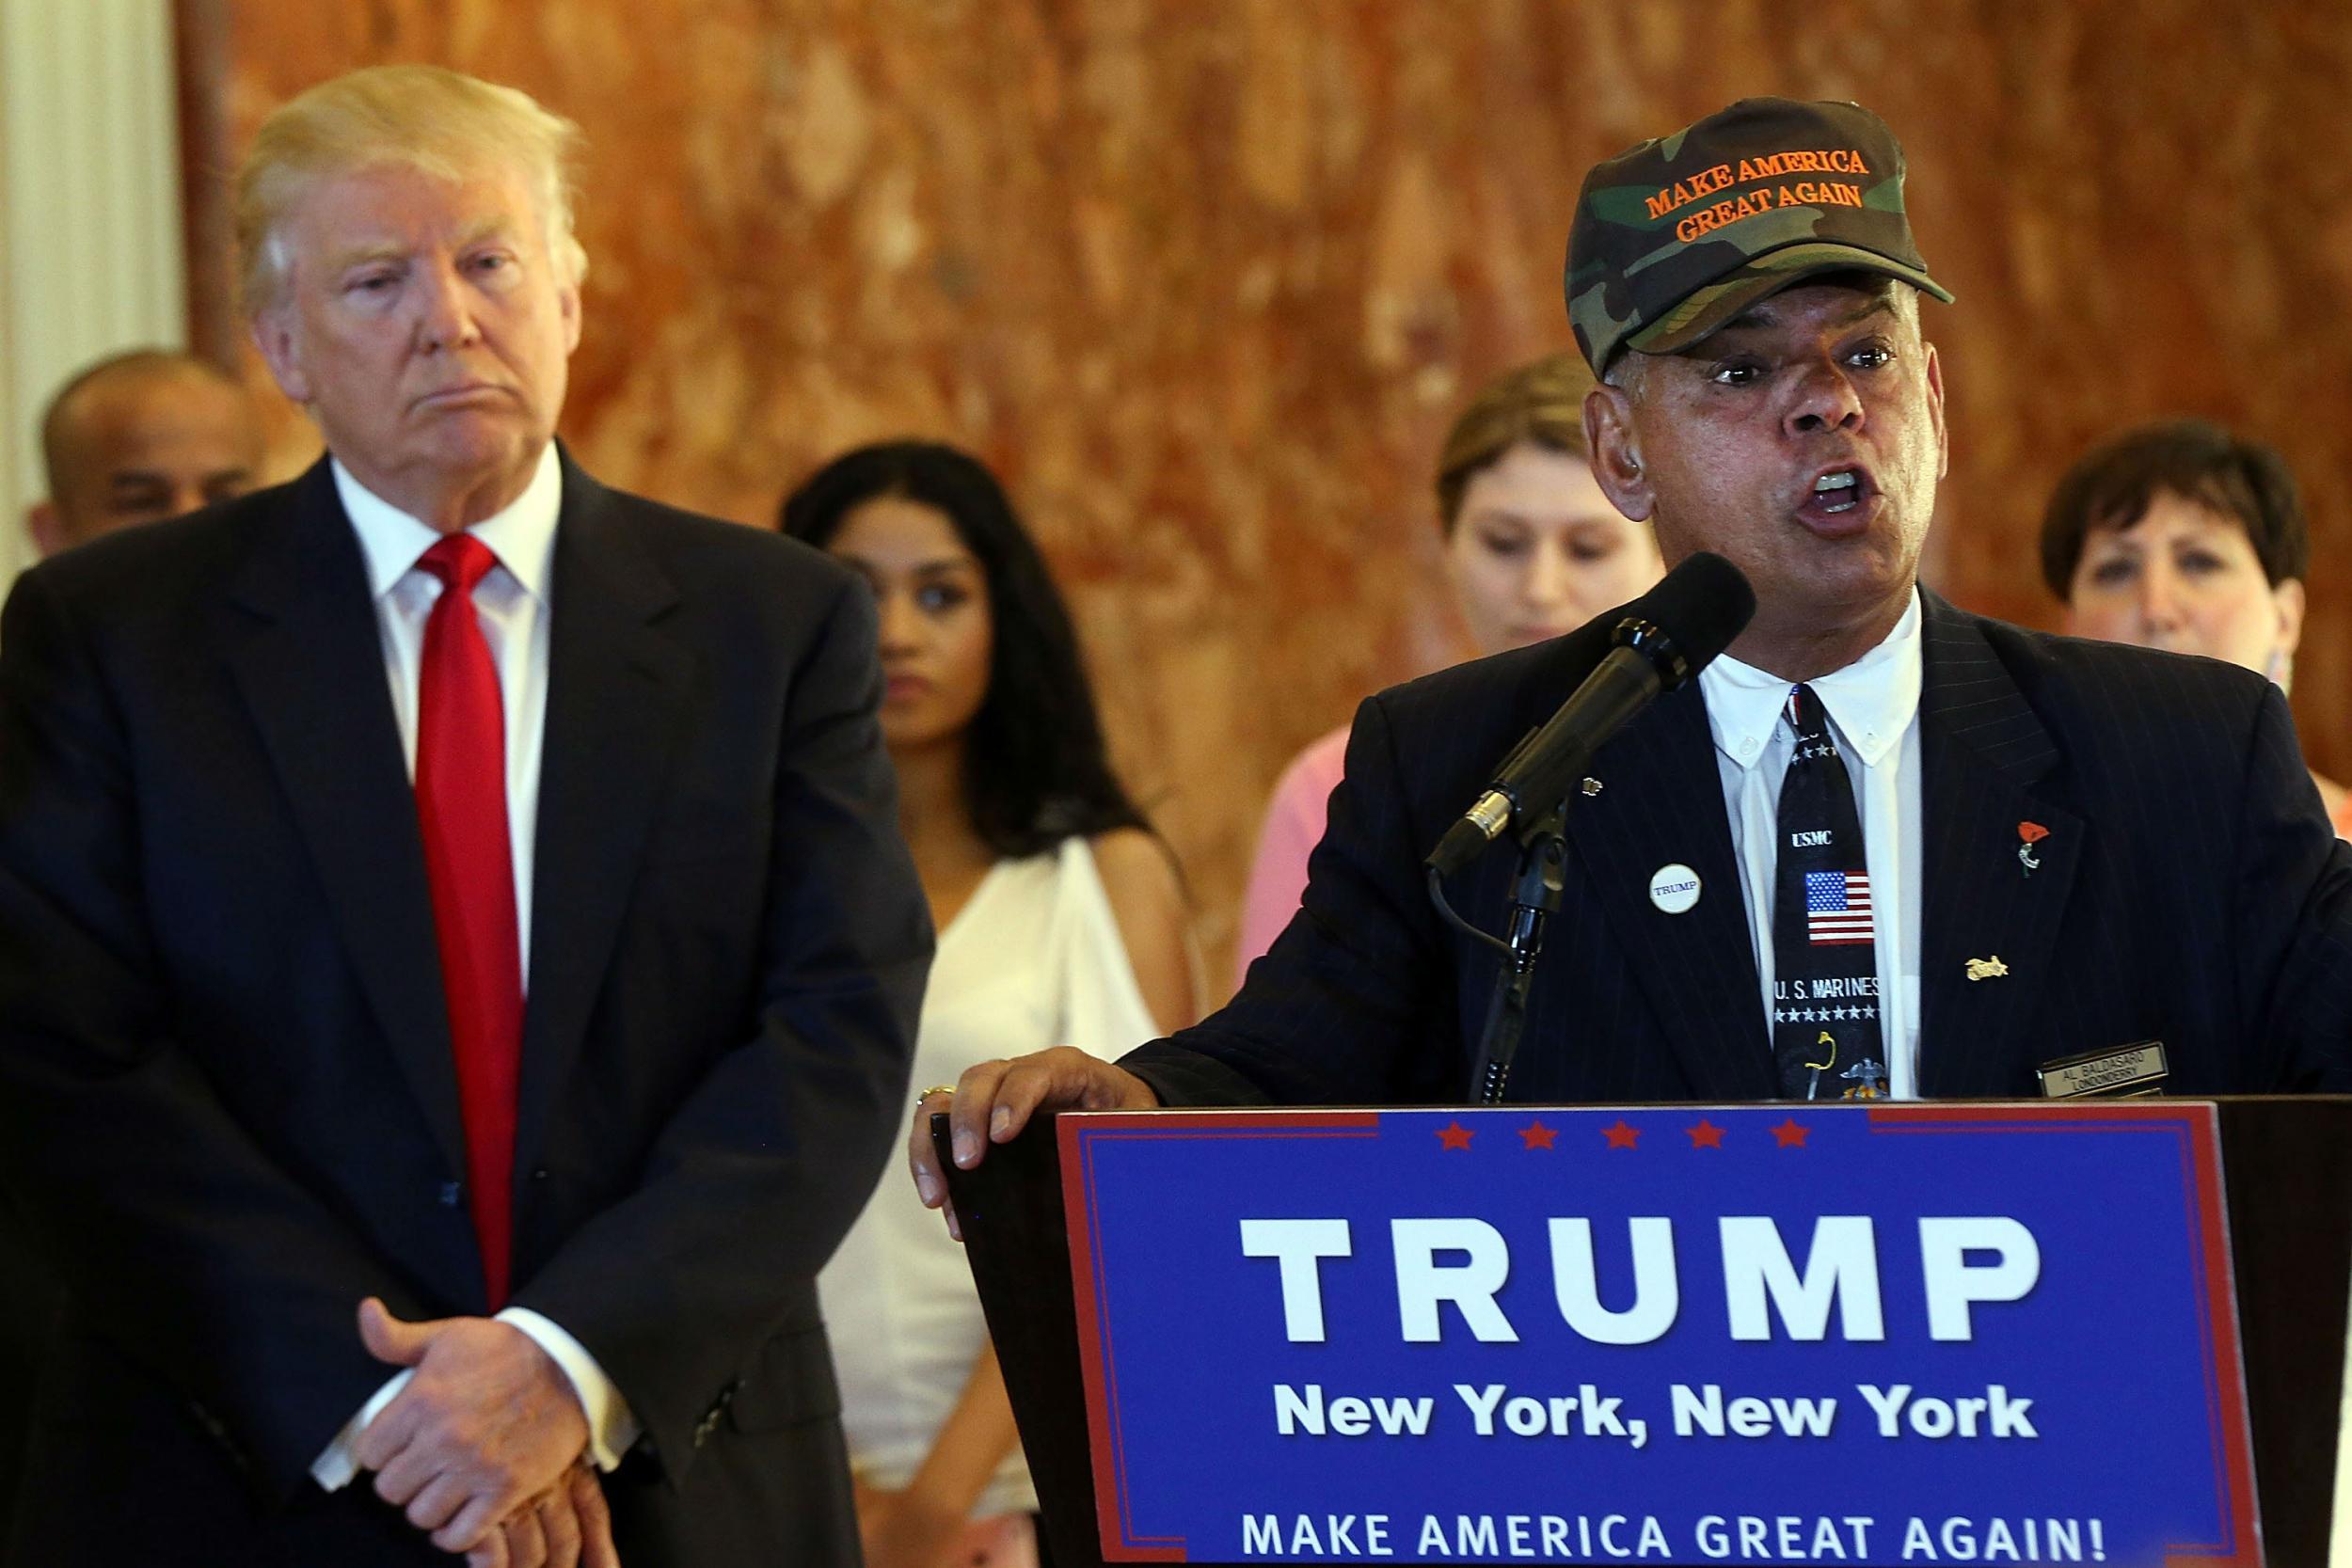 Mr Baldasaro became involved in the campaign through Mr Trump's focus on veterans